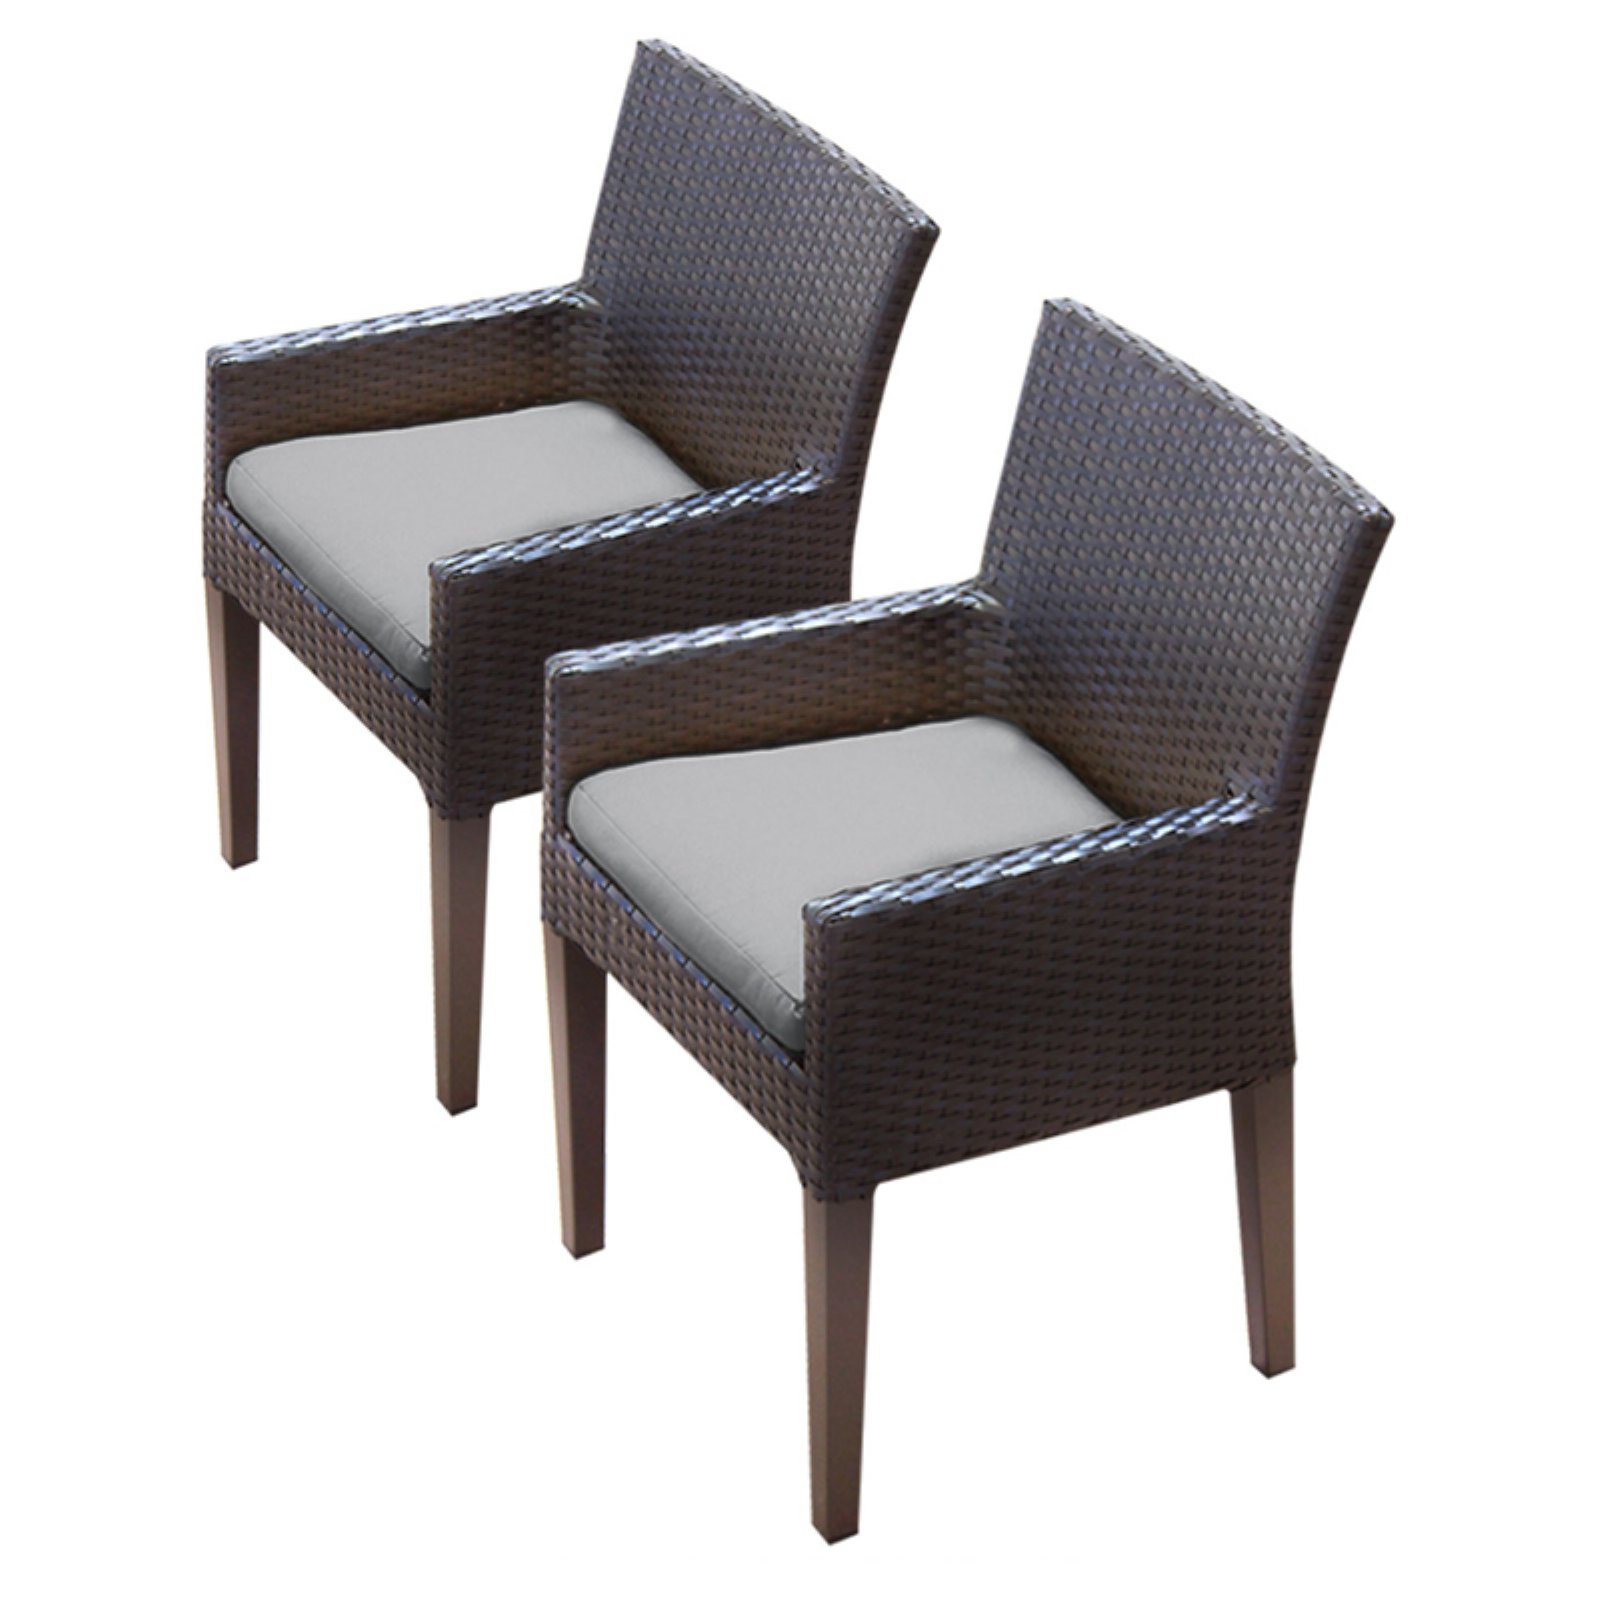 TK Classics Barbados Dining Chair with Arms and Cushion in Gray (Set of 2) - image 1 of 2